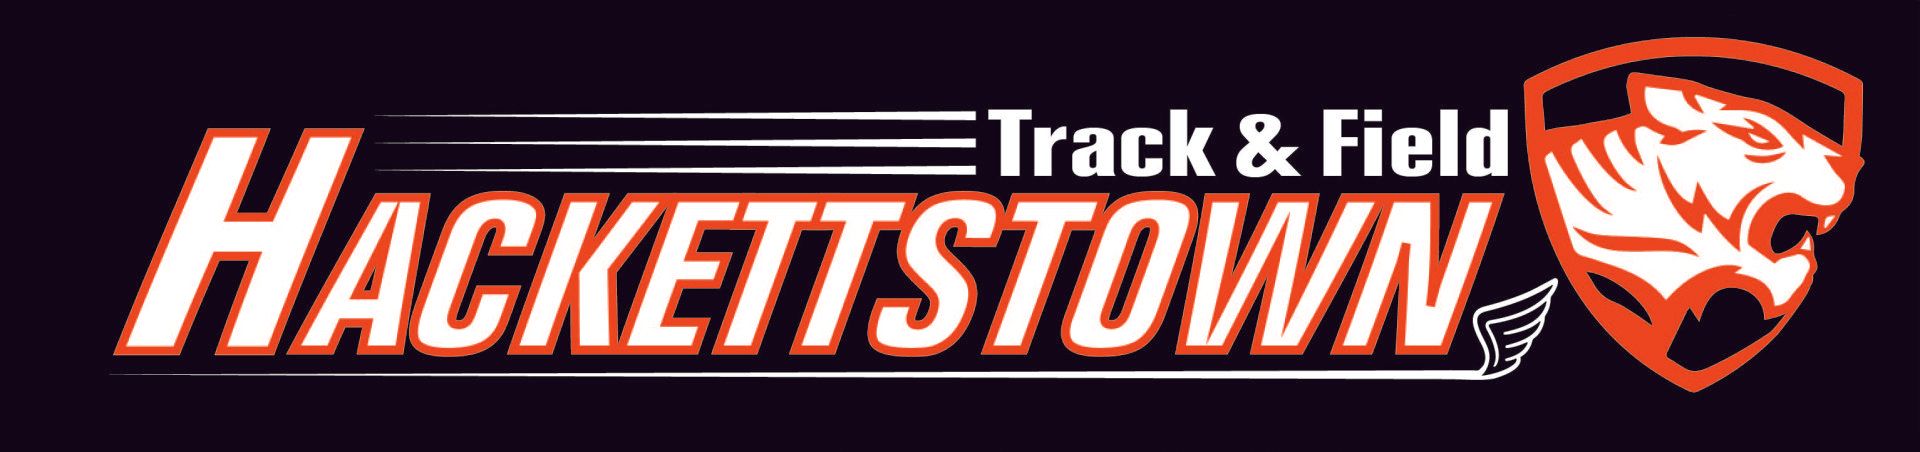 Hackettstown Track and Field